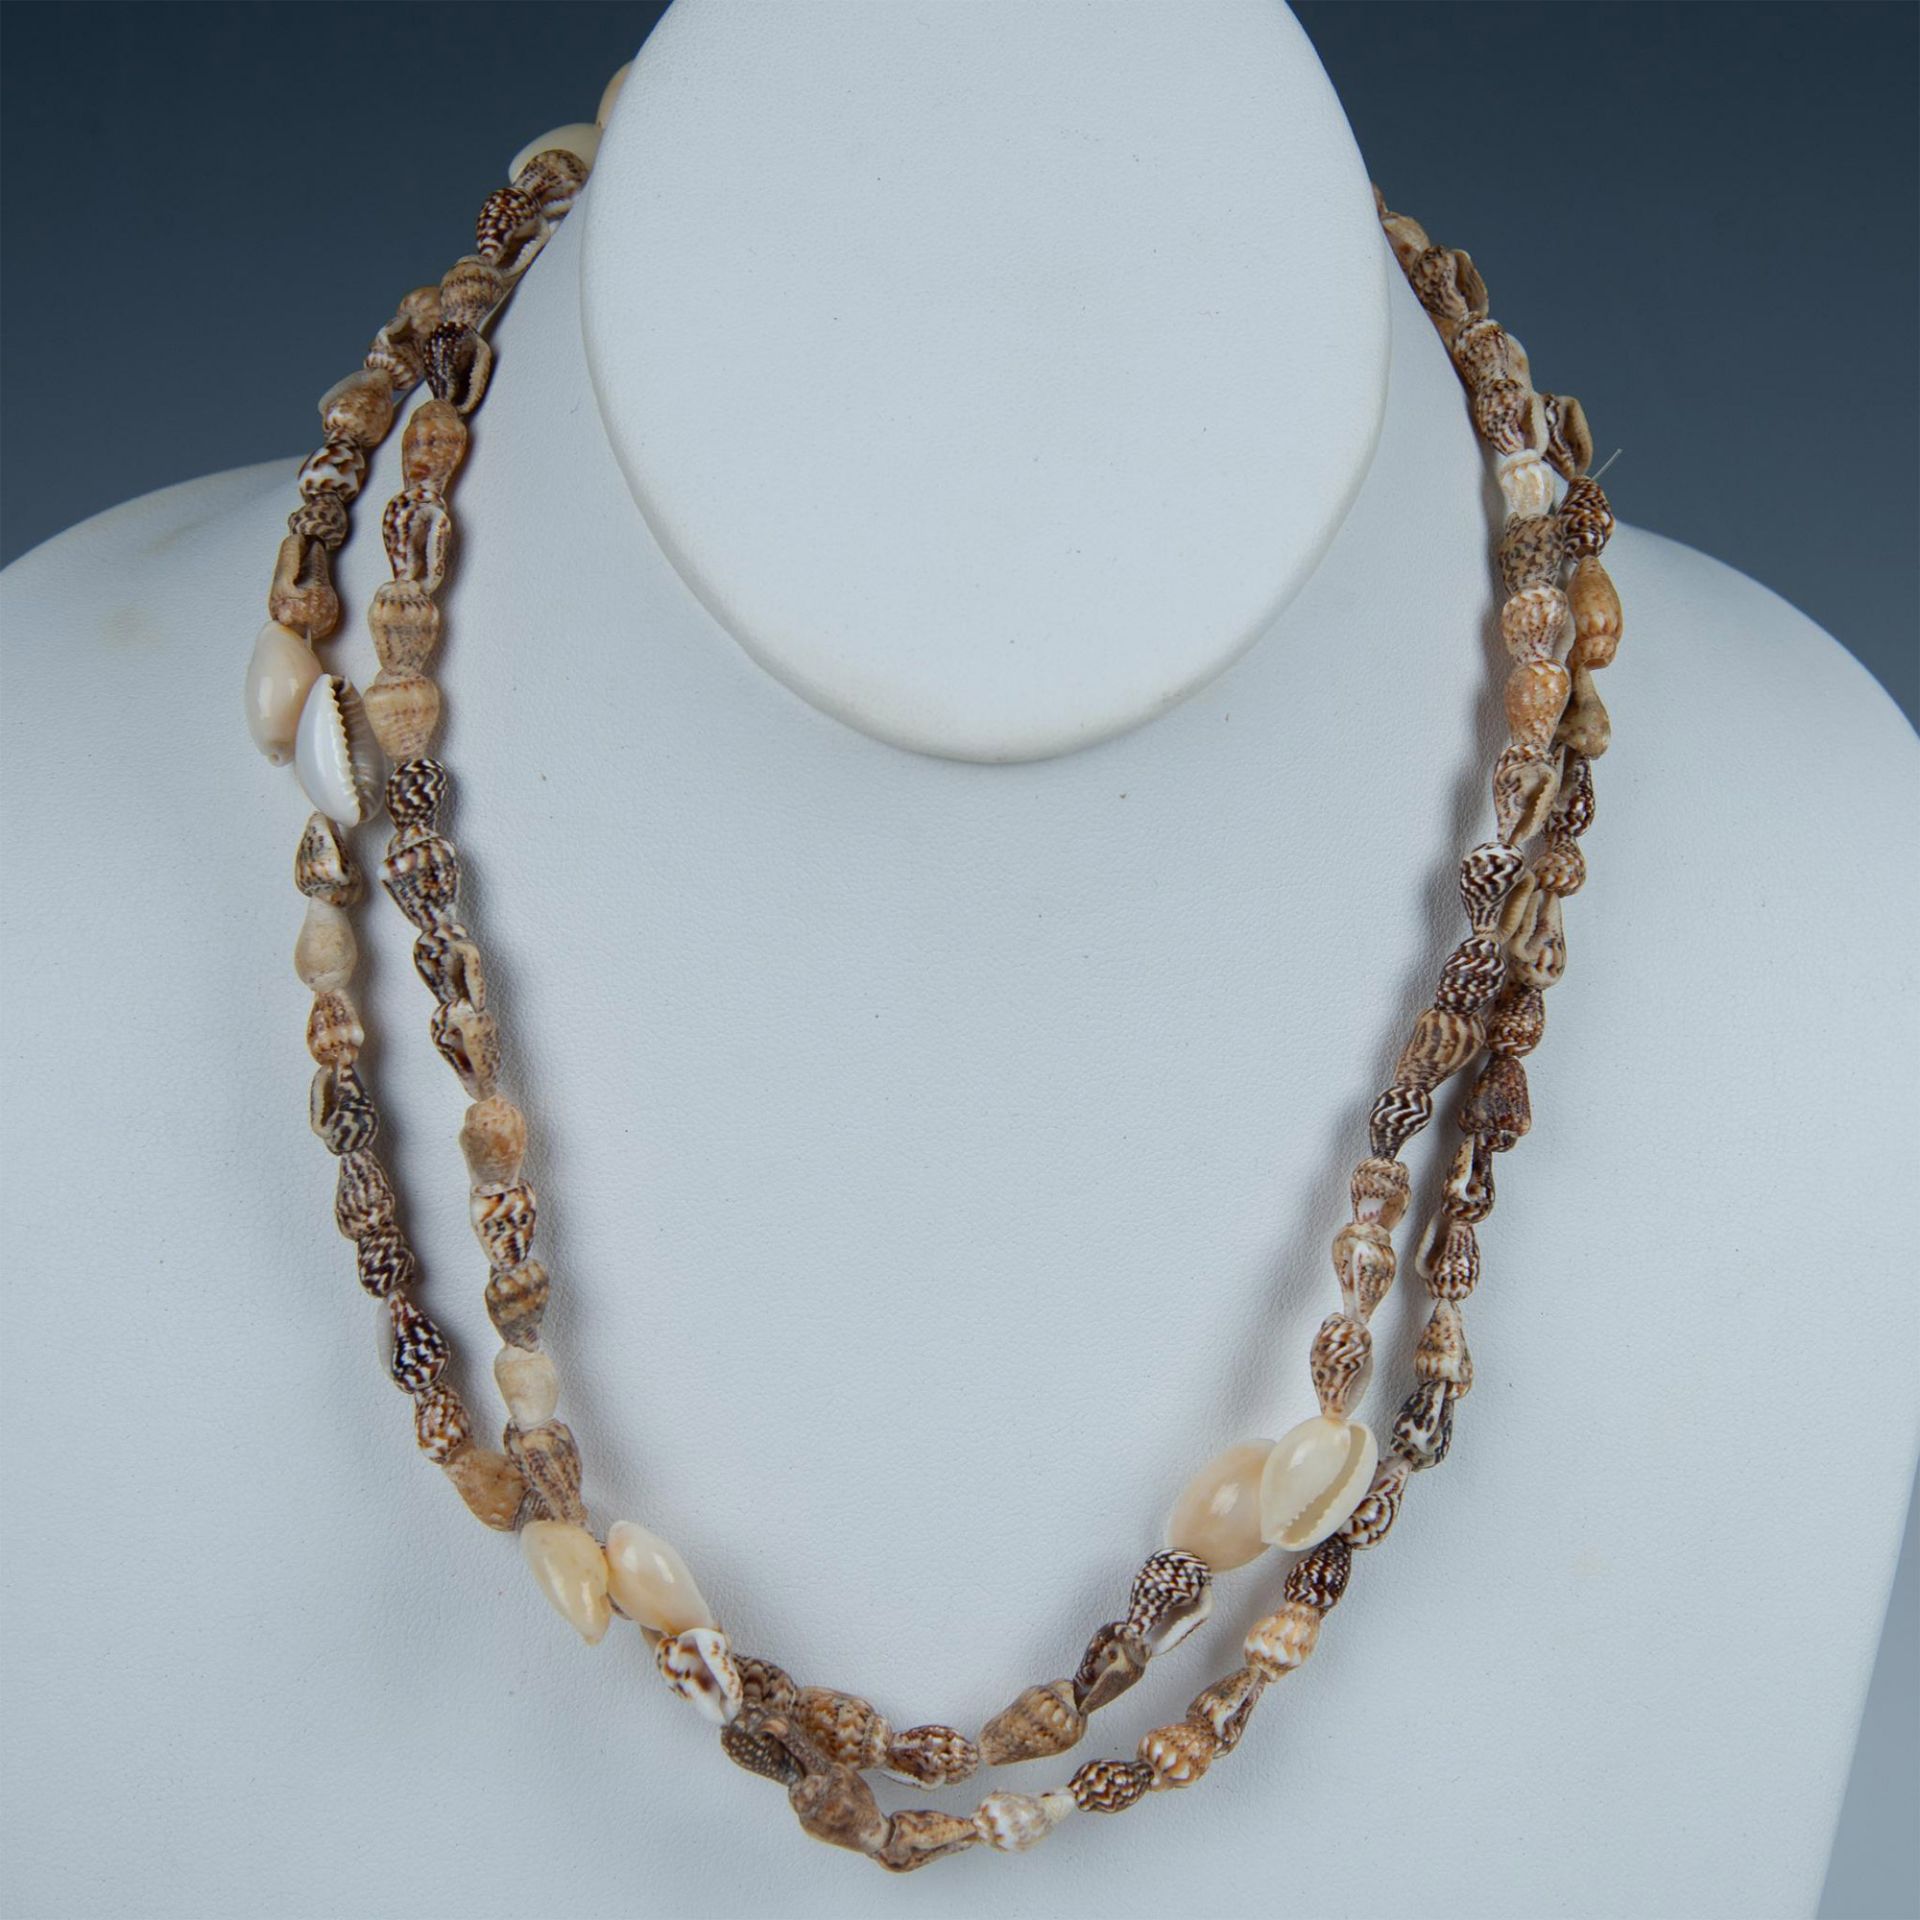 3pc Long Seashell Beach Necklaces - Image 3 of 4